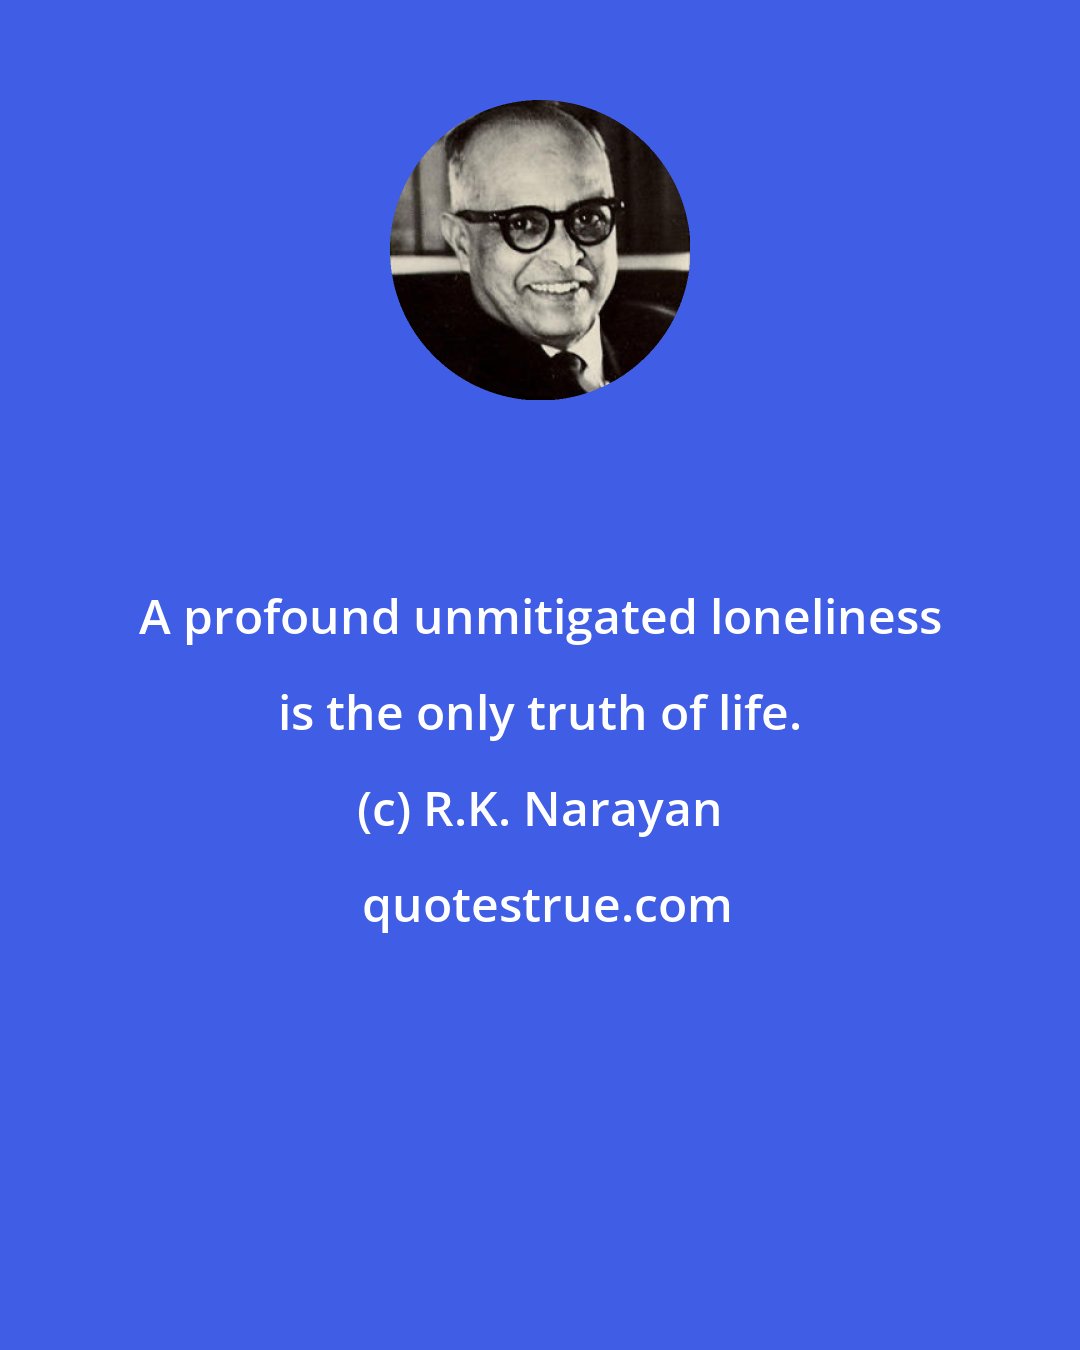 R.K. Narayan: A profound unmitigated loneliness is the only truth of life.